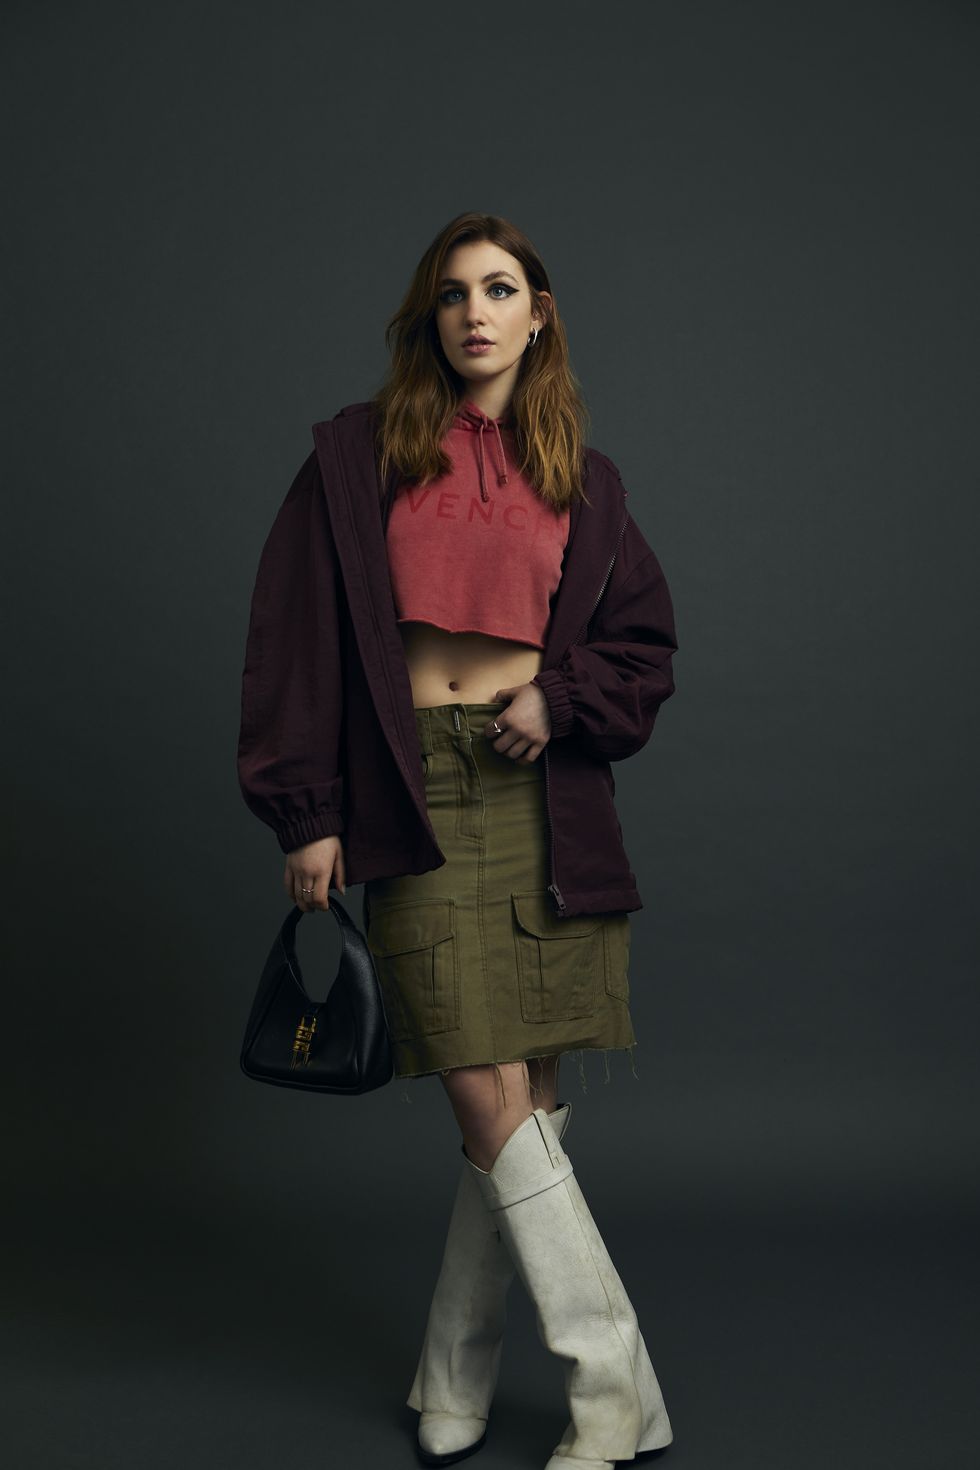 sophie nélisse wearing a cropped sweatshirt, green skirt, and white boots